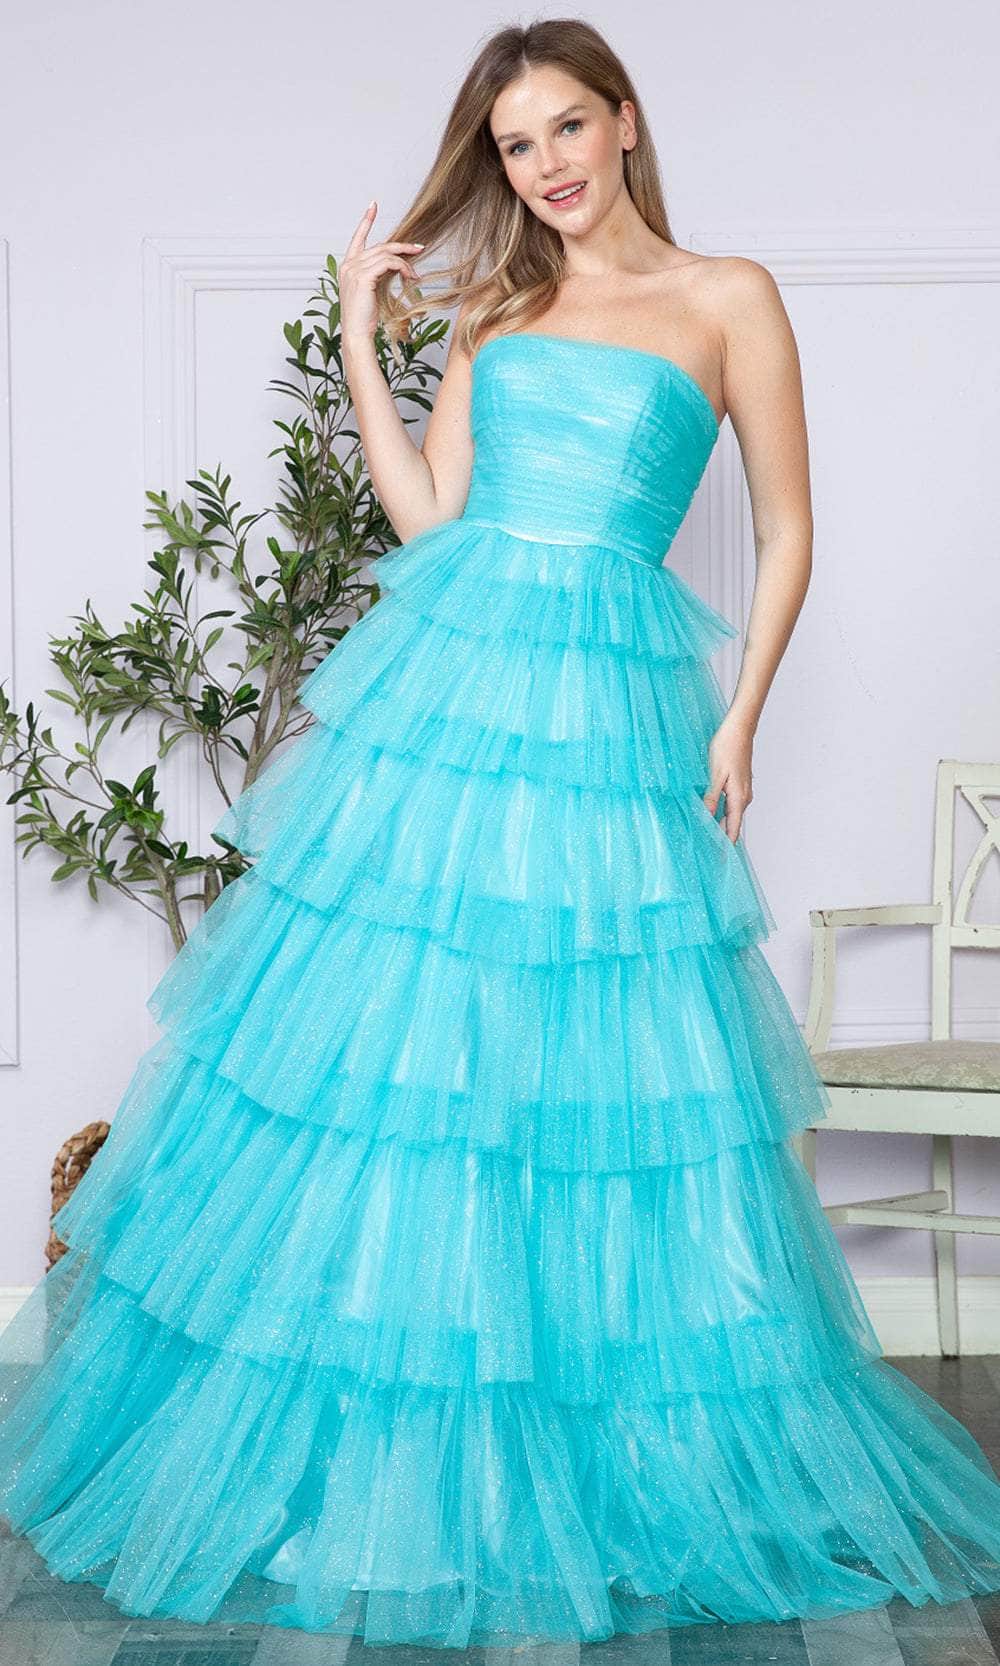 Image of Poly USA 9386 - Strapless Tiered Prom Dress